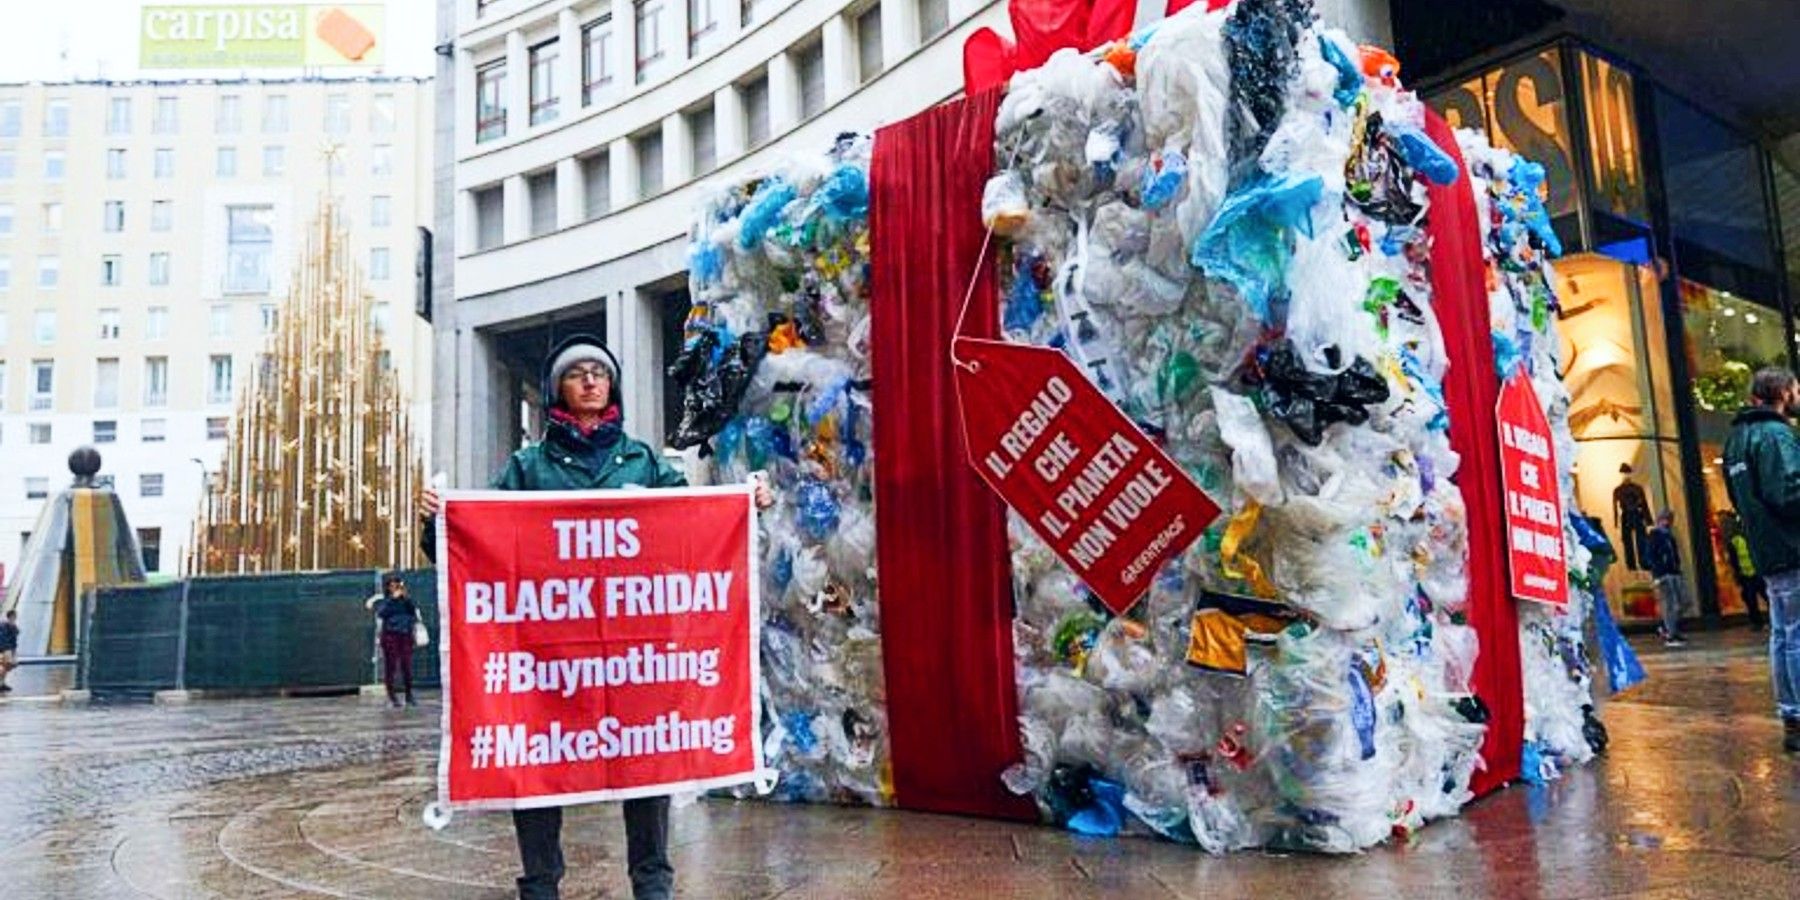 Greenpeace Campaigns Against Black Friday